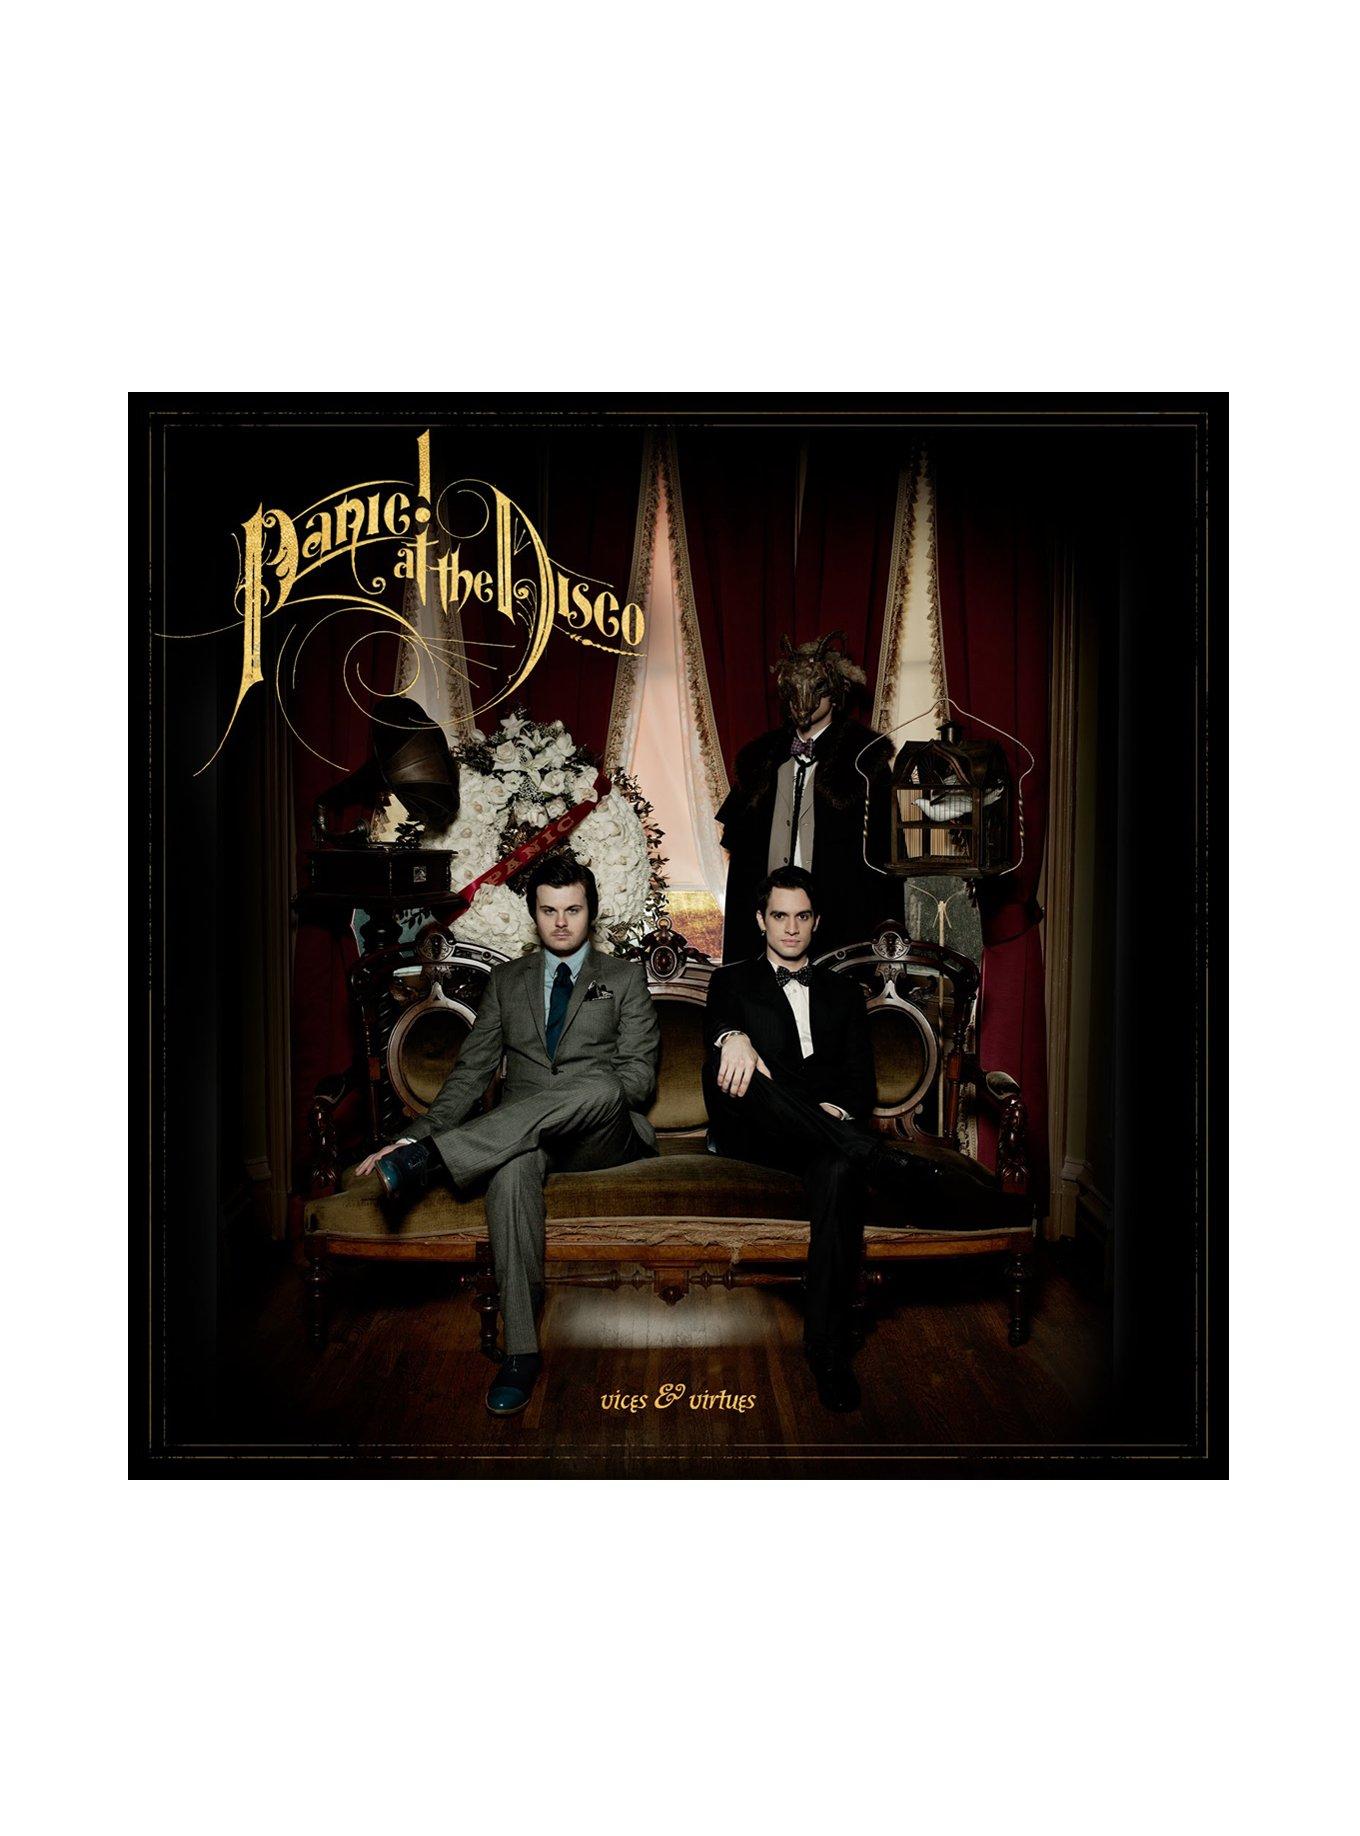 Panic! At The Disco - Vices & Virtues Vinyl LP Hot Topic Exclusive, , hi-res